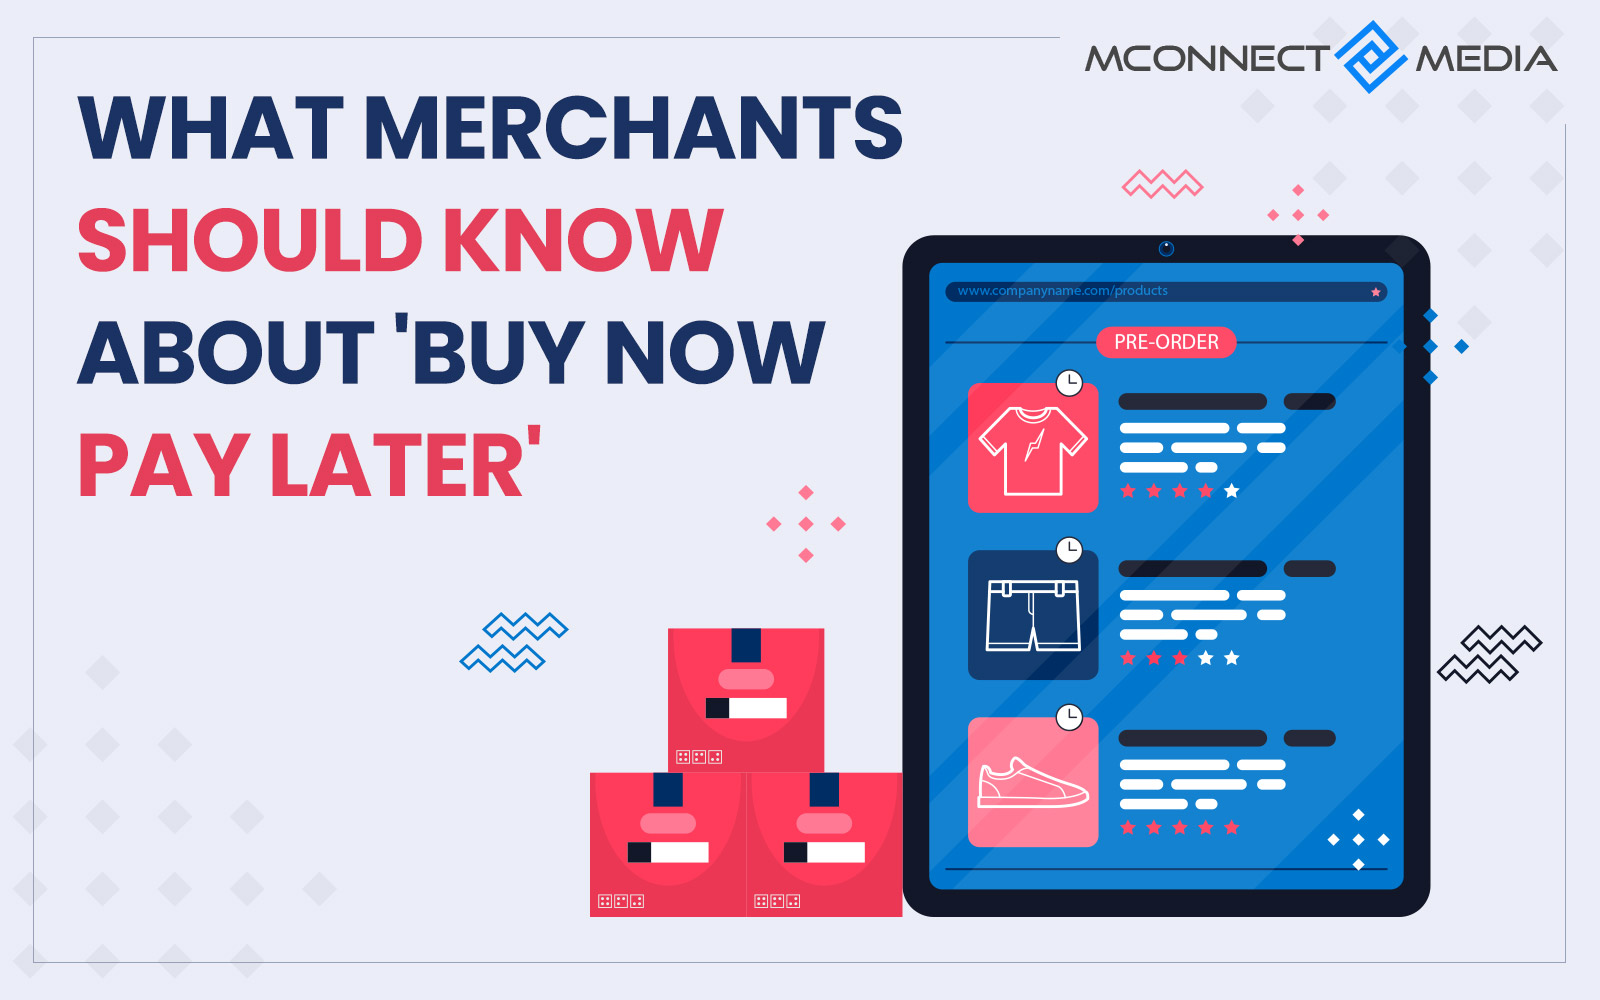 5 Merchant Benefits of Buy Now, Pay Later - Citcon